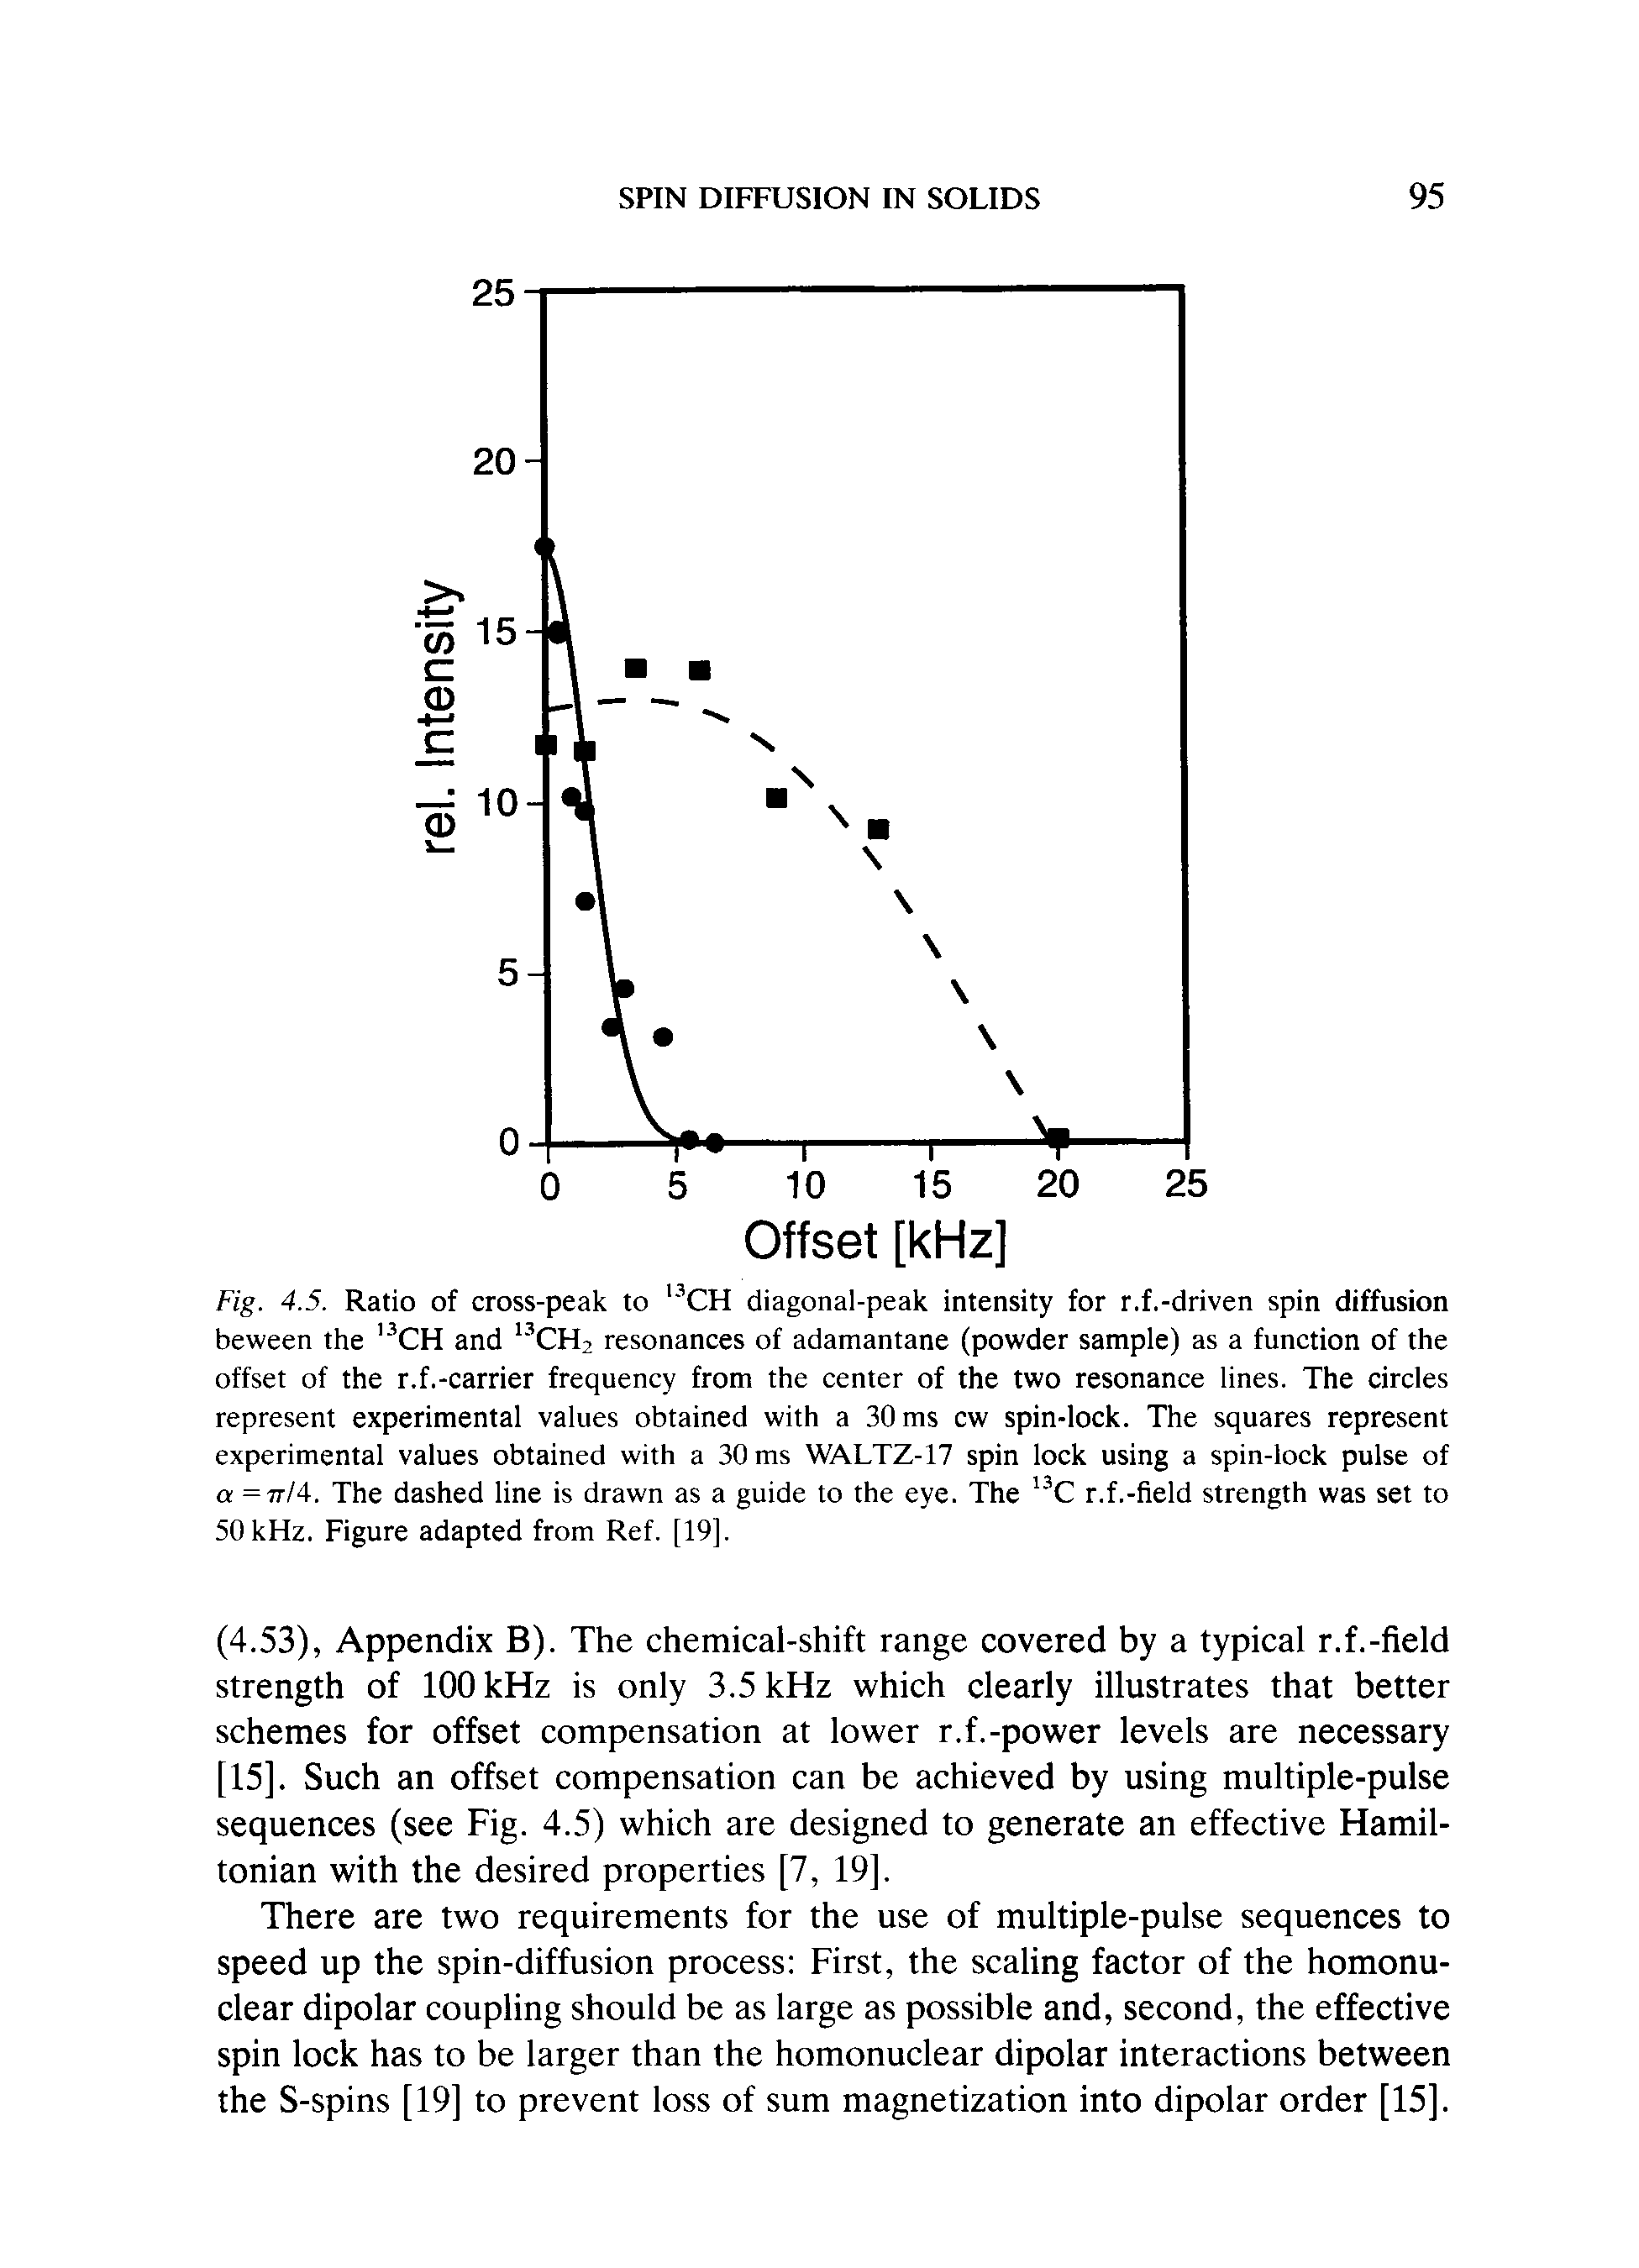 Fig. 4.5. Ratio of cross-peak to CH diagonal-peak intensity for r.f.-driven spin diffusion beween the CH and CH2 resonances of adamantane (powder sample) as a function of the offset of the r.f.-carrier frequency from the center of the two resonance lines. The circles represent experimental values obtained with a 30 ms cw spin-lock. The squares represent experimental values obtained with a 30 ms WALTZ-17 spin lock using a spin-lock pulse of...